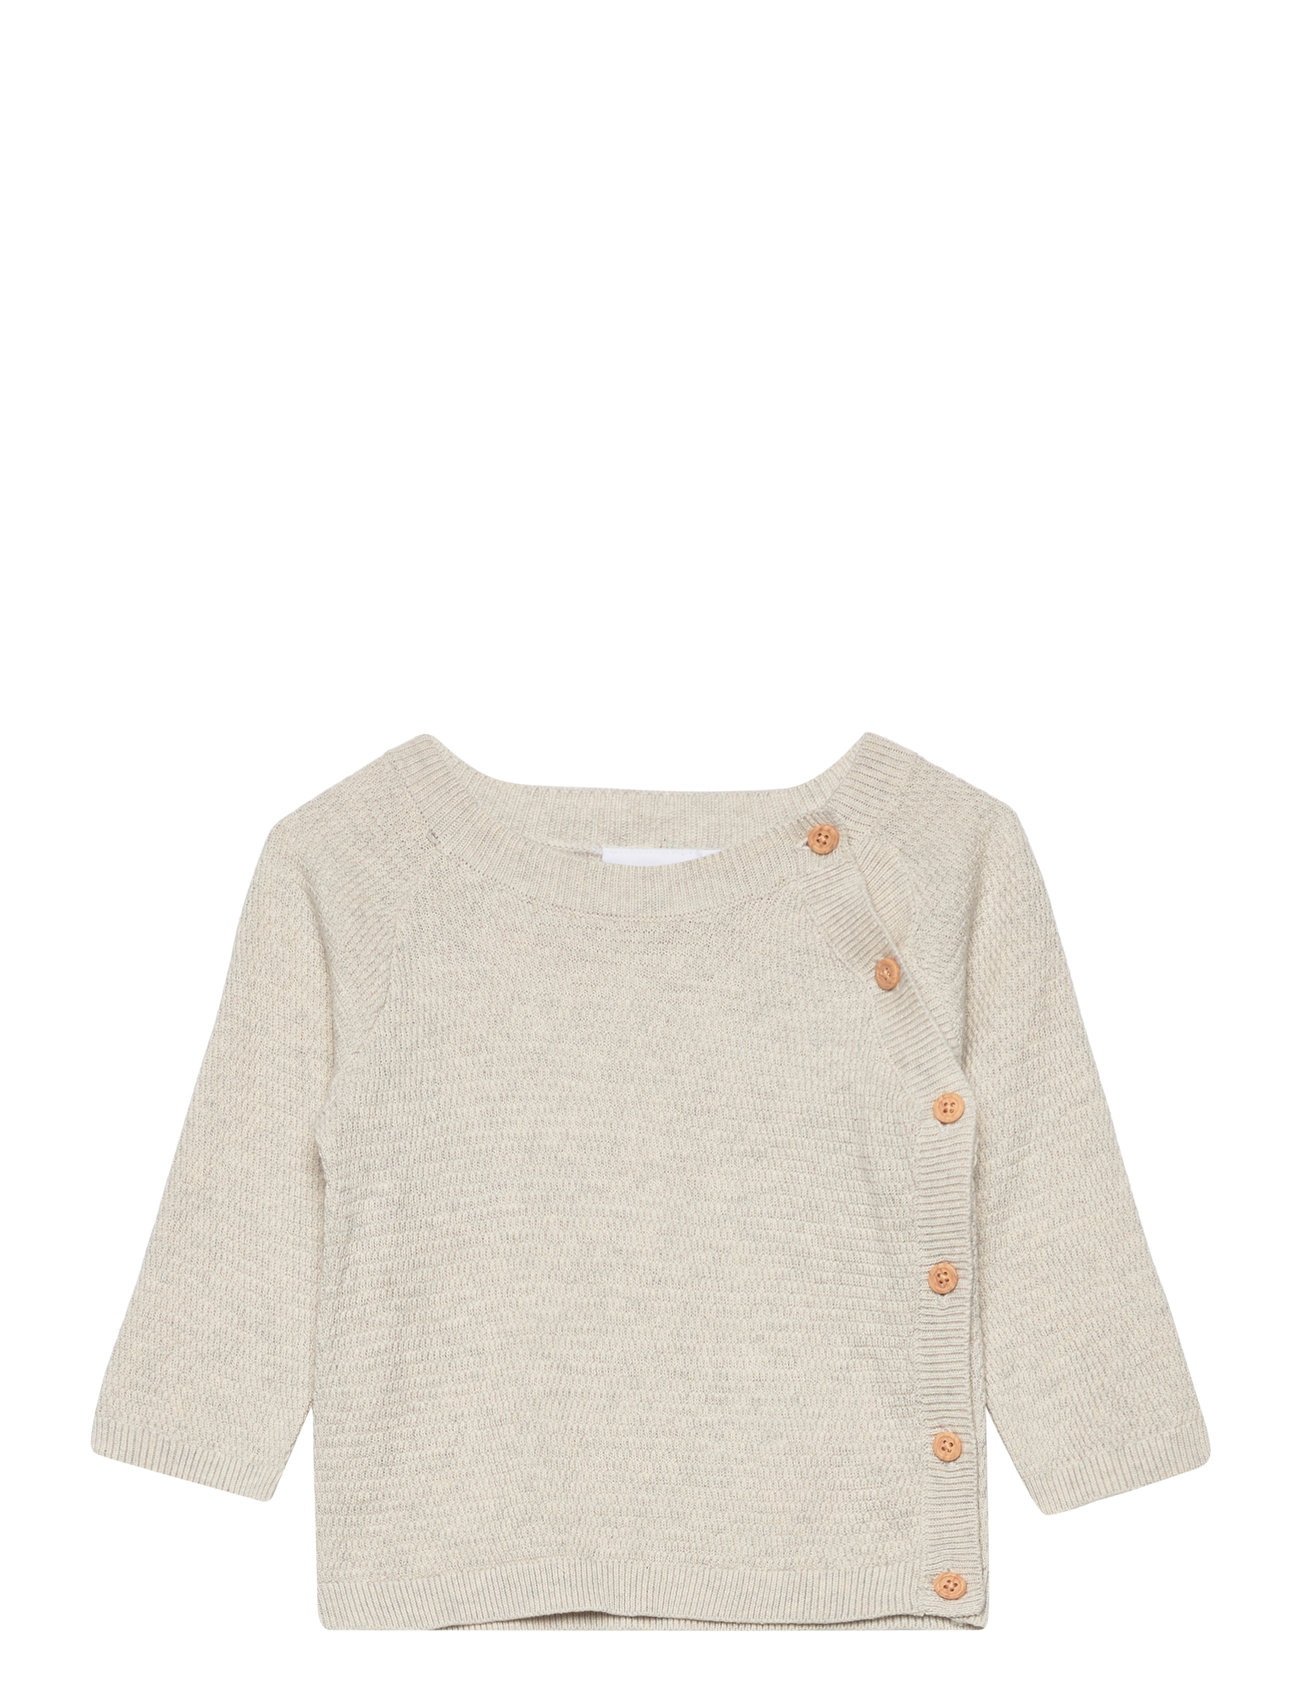 name it Nbnotter Ls Tops - Card Knit